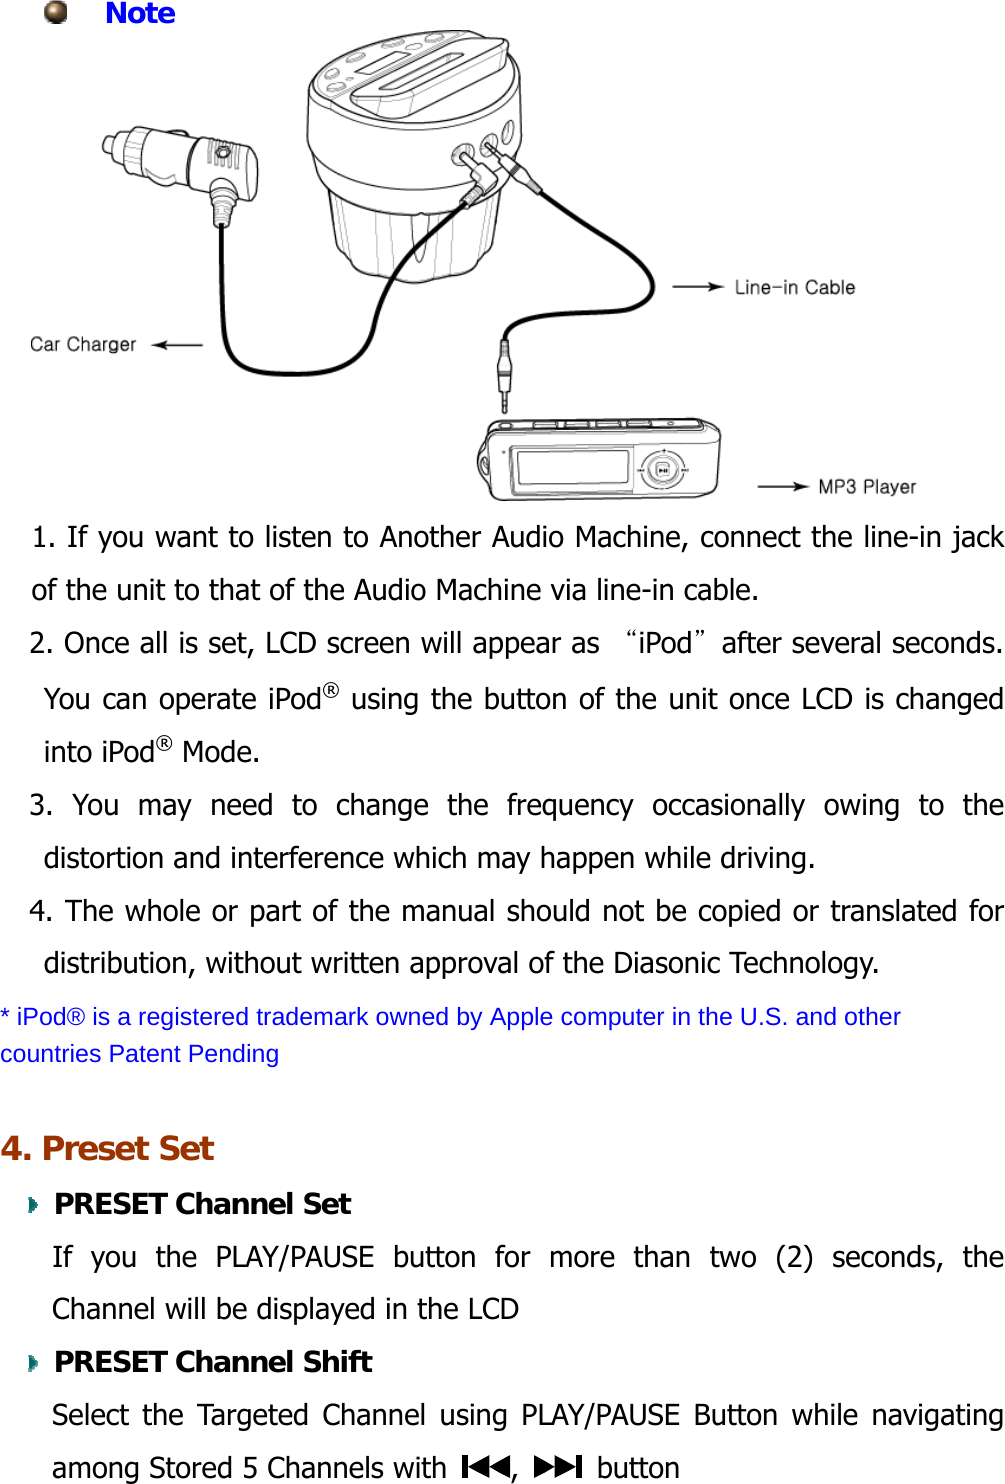   Note   1. If you want to listen to Another Audio Machine, connect the line-in jack of the unit to that of the Audio Machine via line-in cable.     2. Once all is set, LCD screen will appear as “iPod”after several seconds. You can operate iPod® using the button of the unit once LCD is changed into iPod® Mode. 3. You may need to change the frequency occasionally owing to the distortion and interference which may happen while driving. 4. The whole or part of the manual should not be copied or translated for distribution, without written approval of the Diasonic Technology. * iPod® is a registered trademark owned by Apple computer in the U.S. and other countries Patent Pending  4. Preset Set     PRESET Channel Set    If you the PLAY/PAUSE button for more than two (2) seconds, the Channel will be displayed in the LCD     PRESET Channel Shift Select the Targeted Channel using PLAY/PAUSE Button while navigating  among Stored 5 Channels with  ,   button 